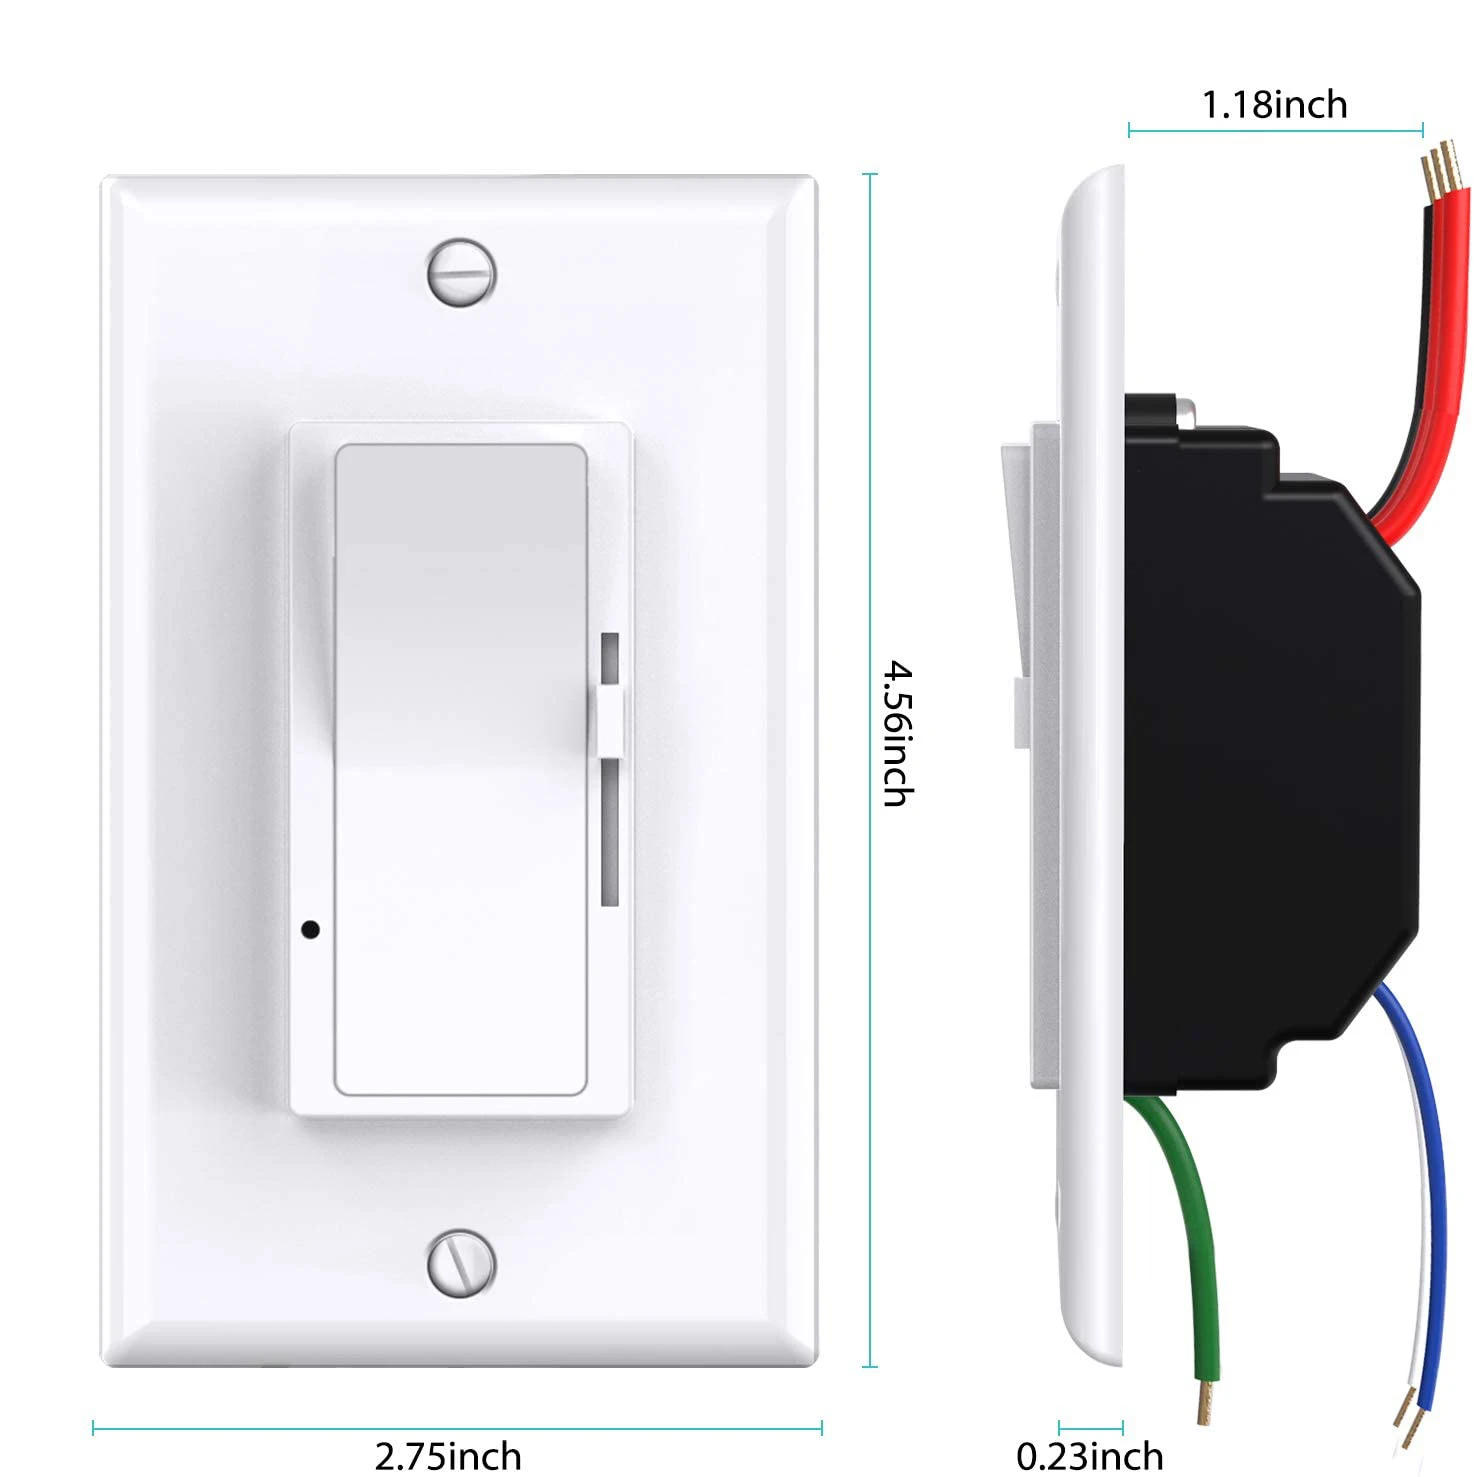 USA Standard High Quality 3-Way LED Triac 110V  Dimmer With Slide Switch